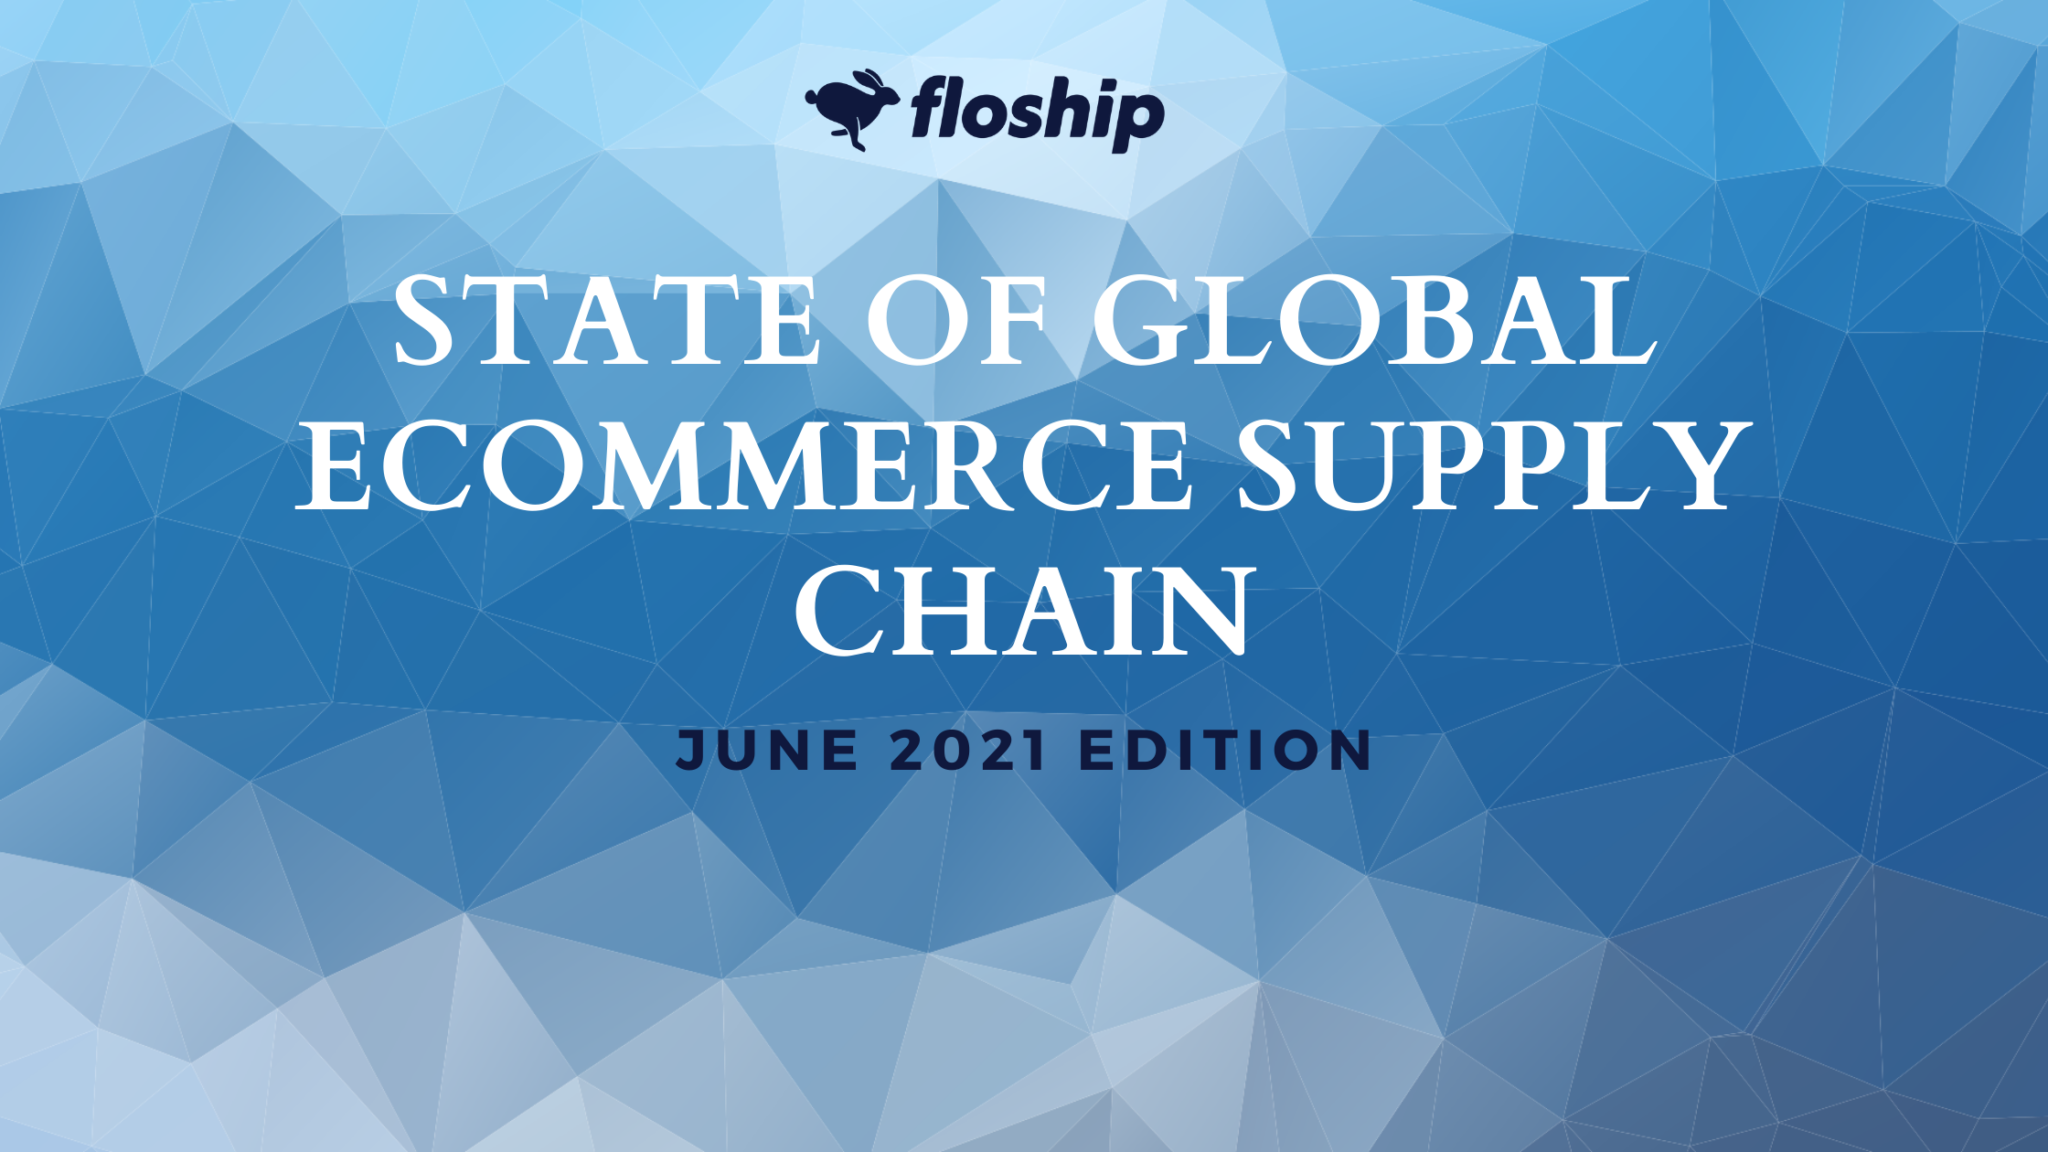 5 Global Supply Chain Management Tips Ecommerce Sellers